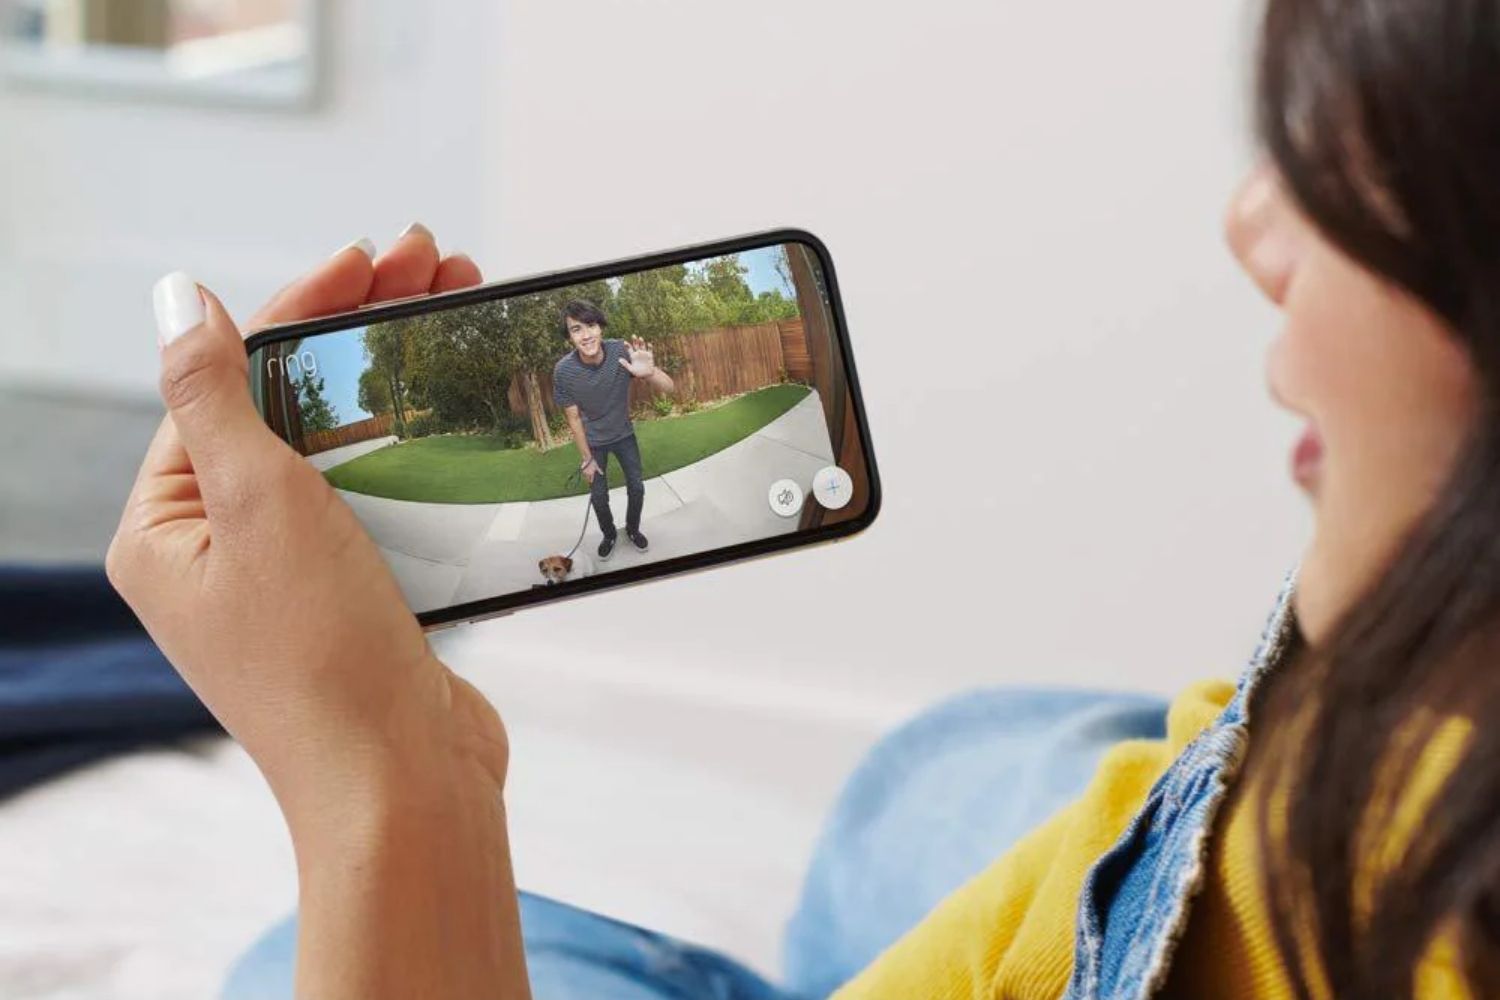 A person looking at the screen of the best home intercom system showing another person waving hello while walking a dog